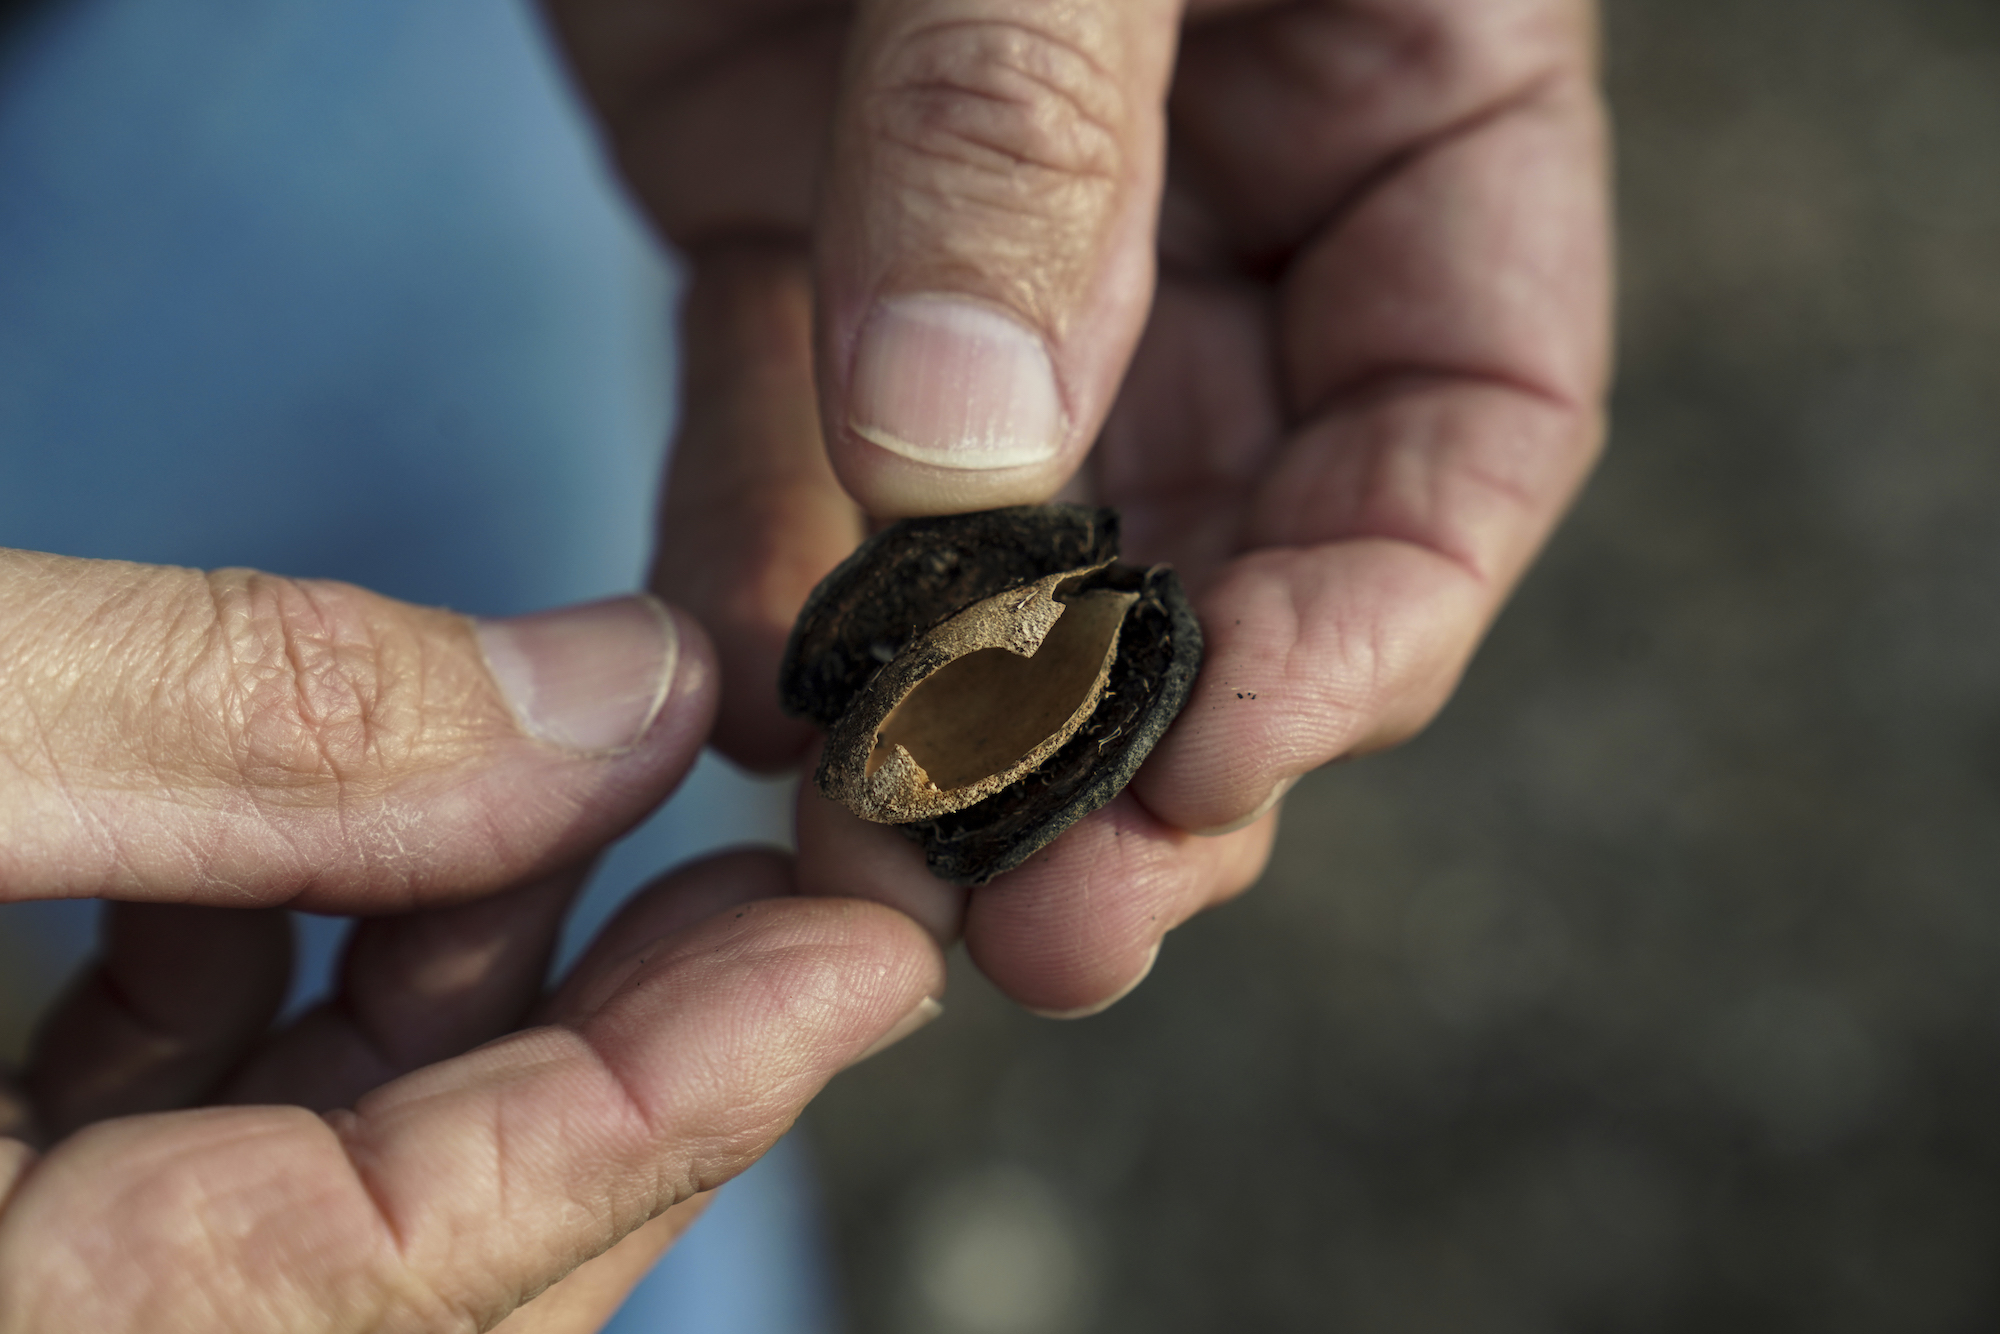 Kirk Pumphrey's holds the dark hull of an almond in his hands. He's using hulls and shells as mulch in his orchard to increase soil moisture. (Karin Higgins/UC Davis)